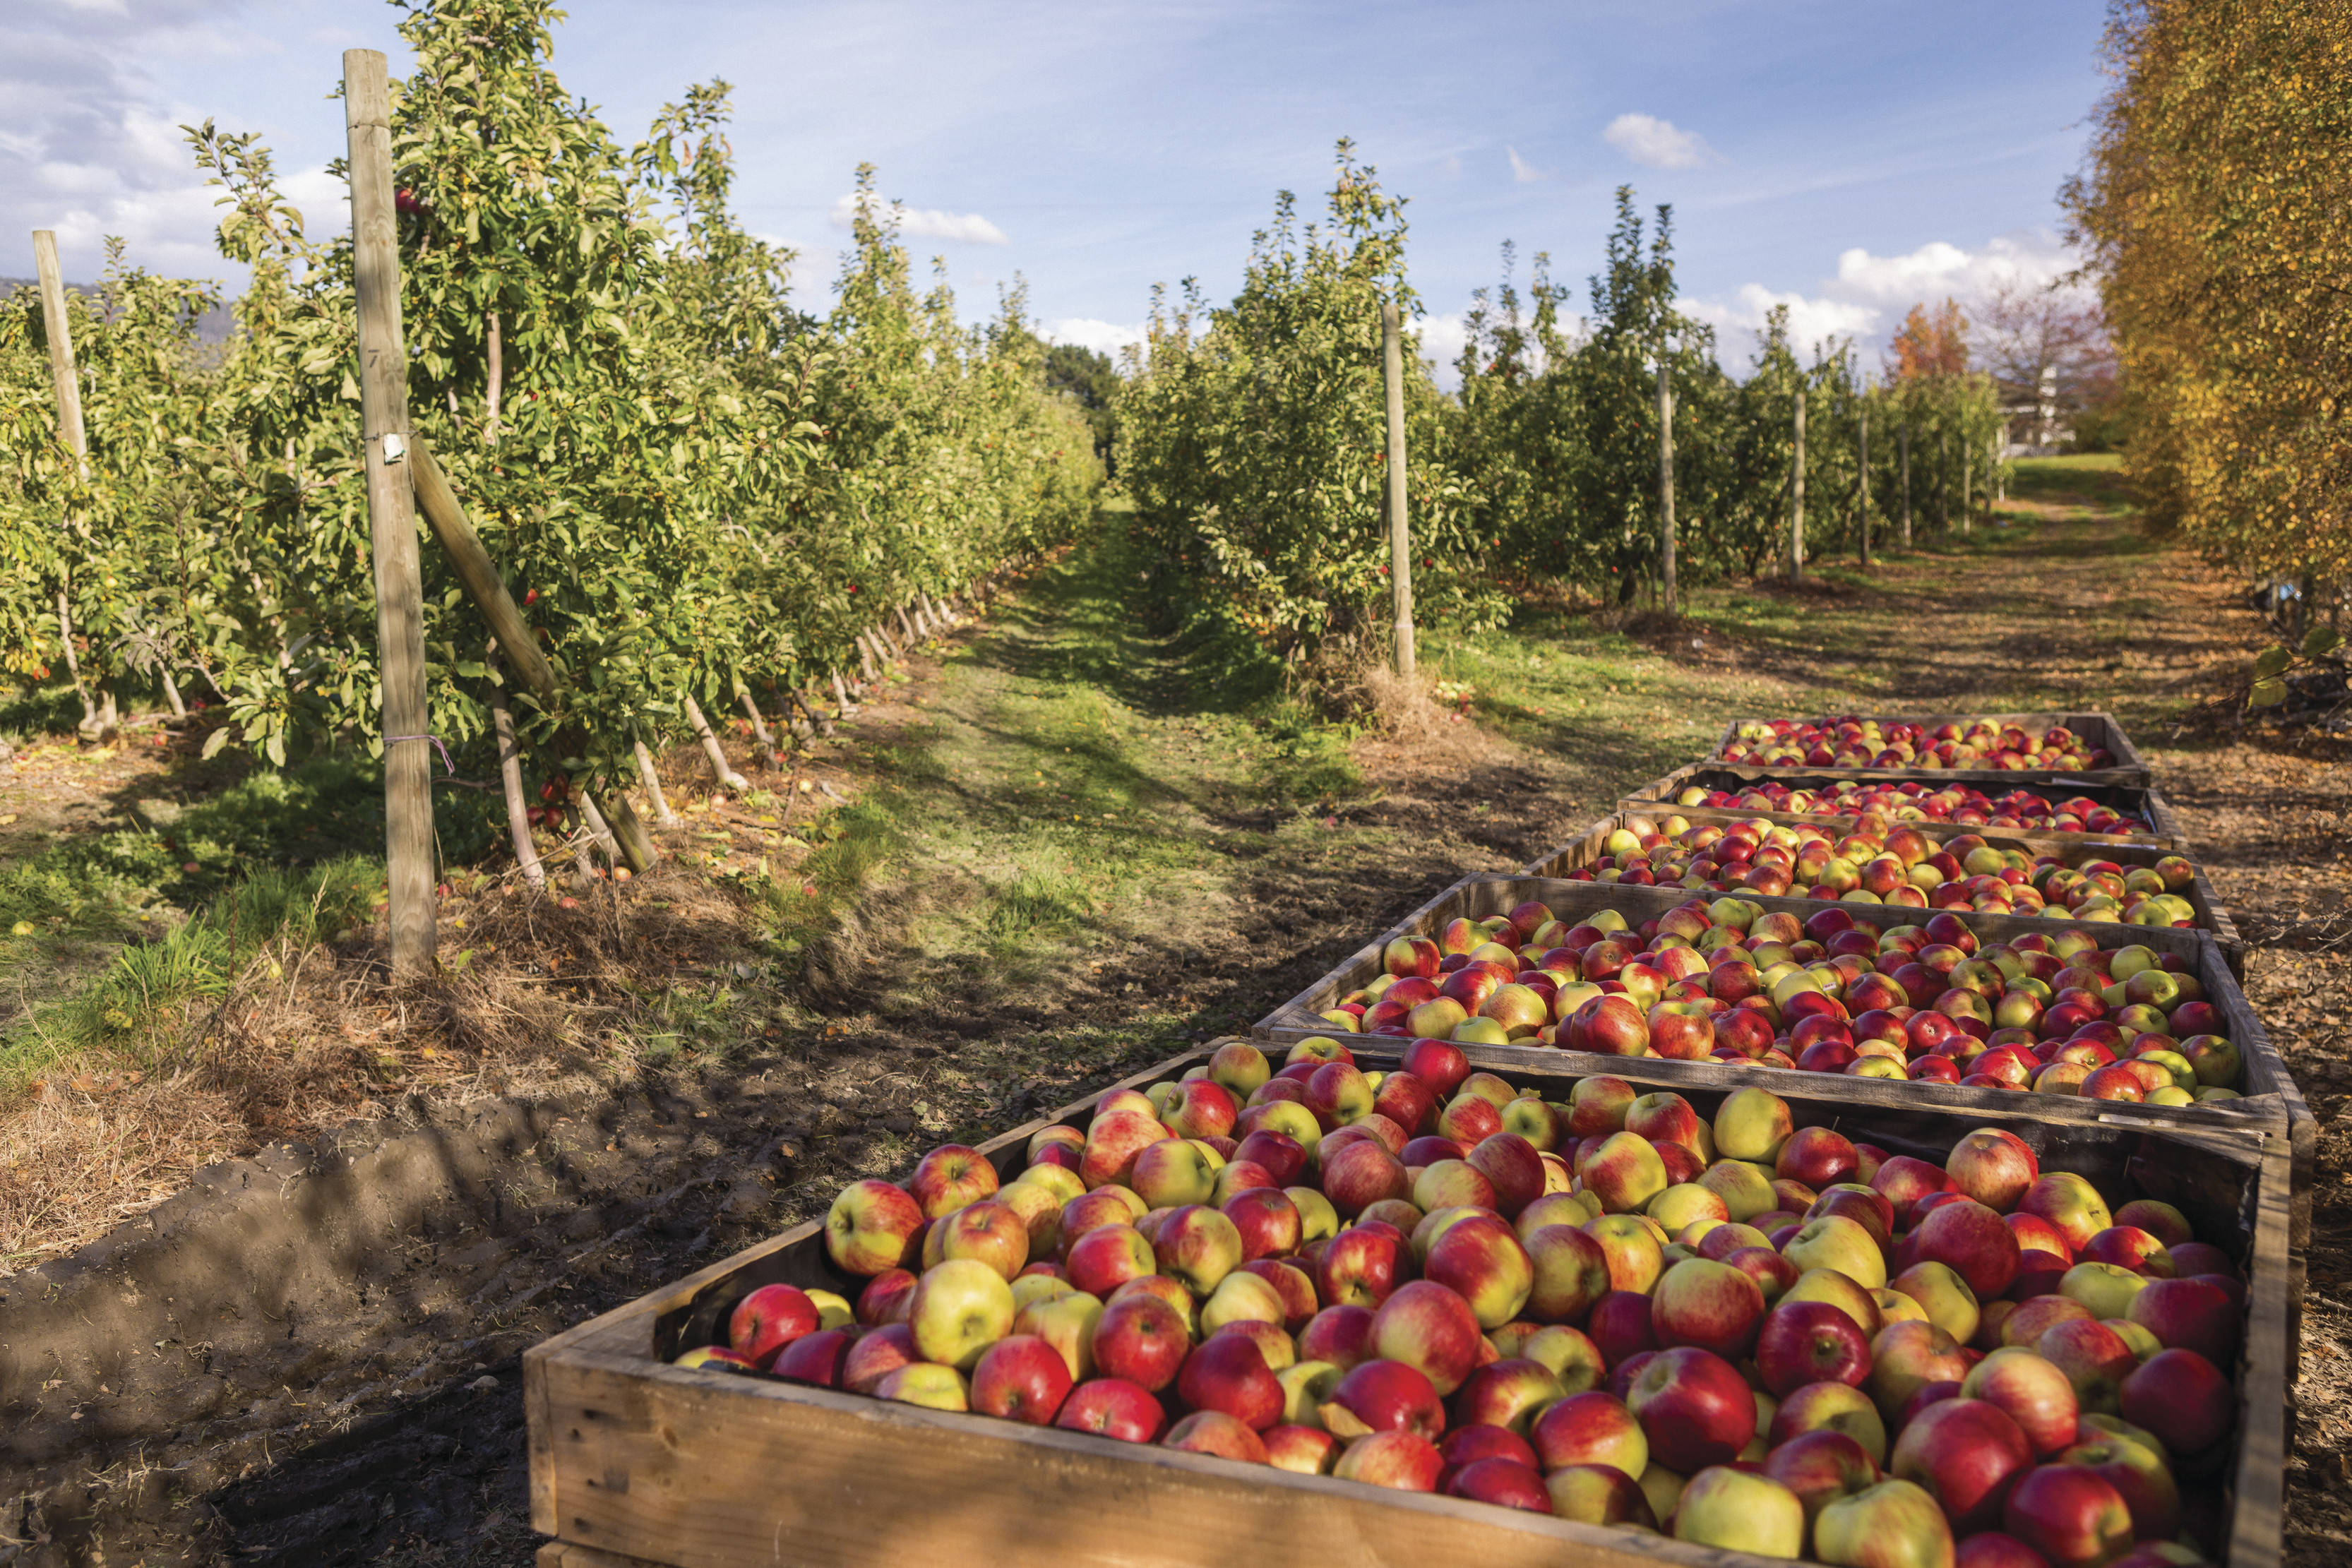 Stunning image of four large crates full of apples that have been picked from the field right next to them.